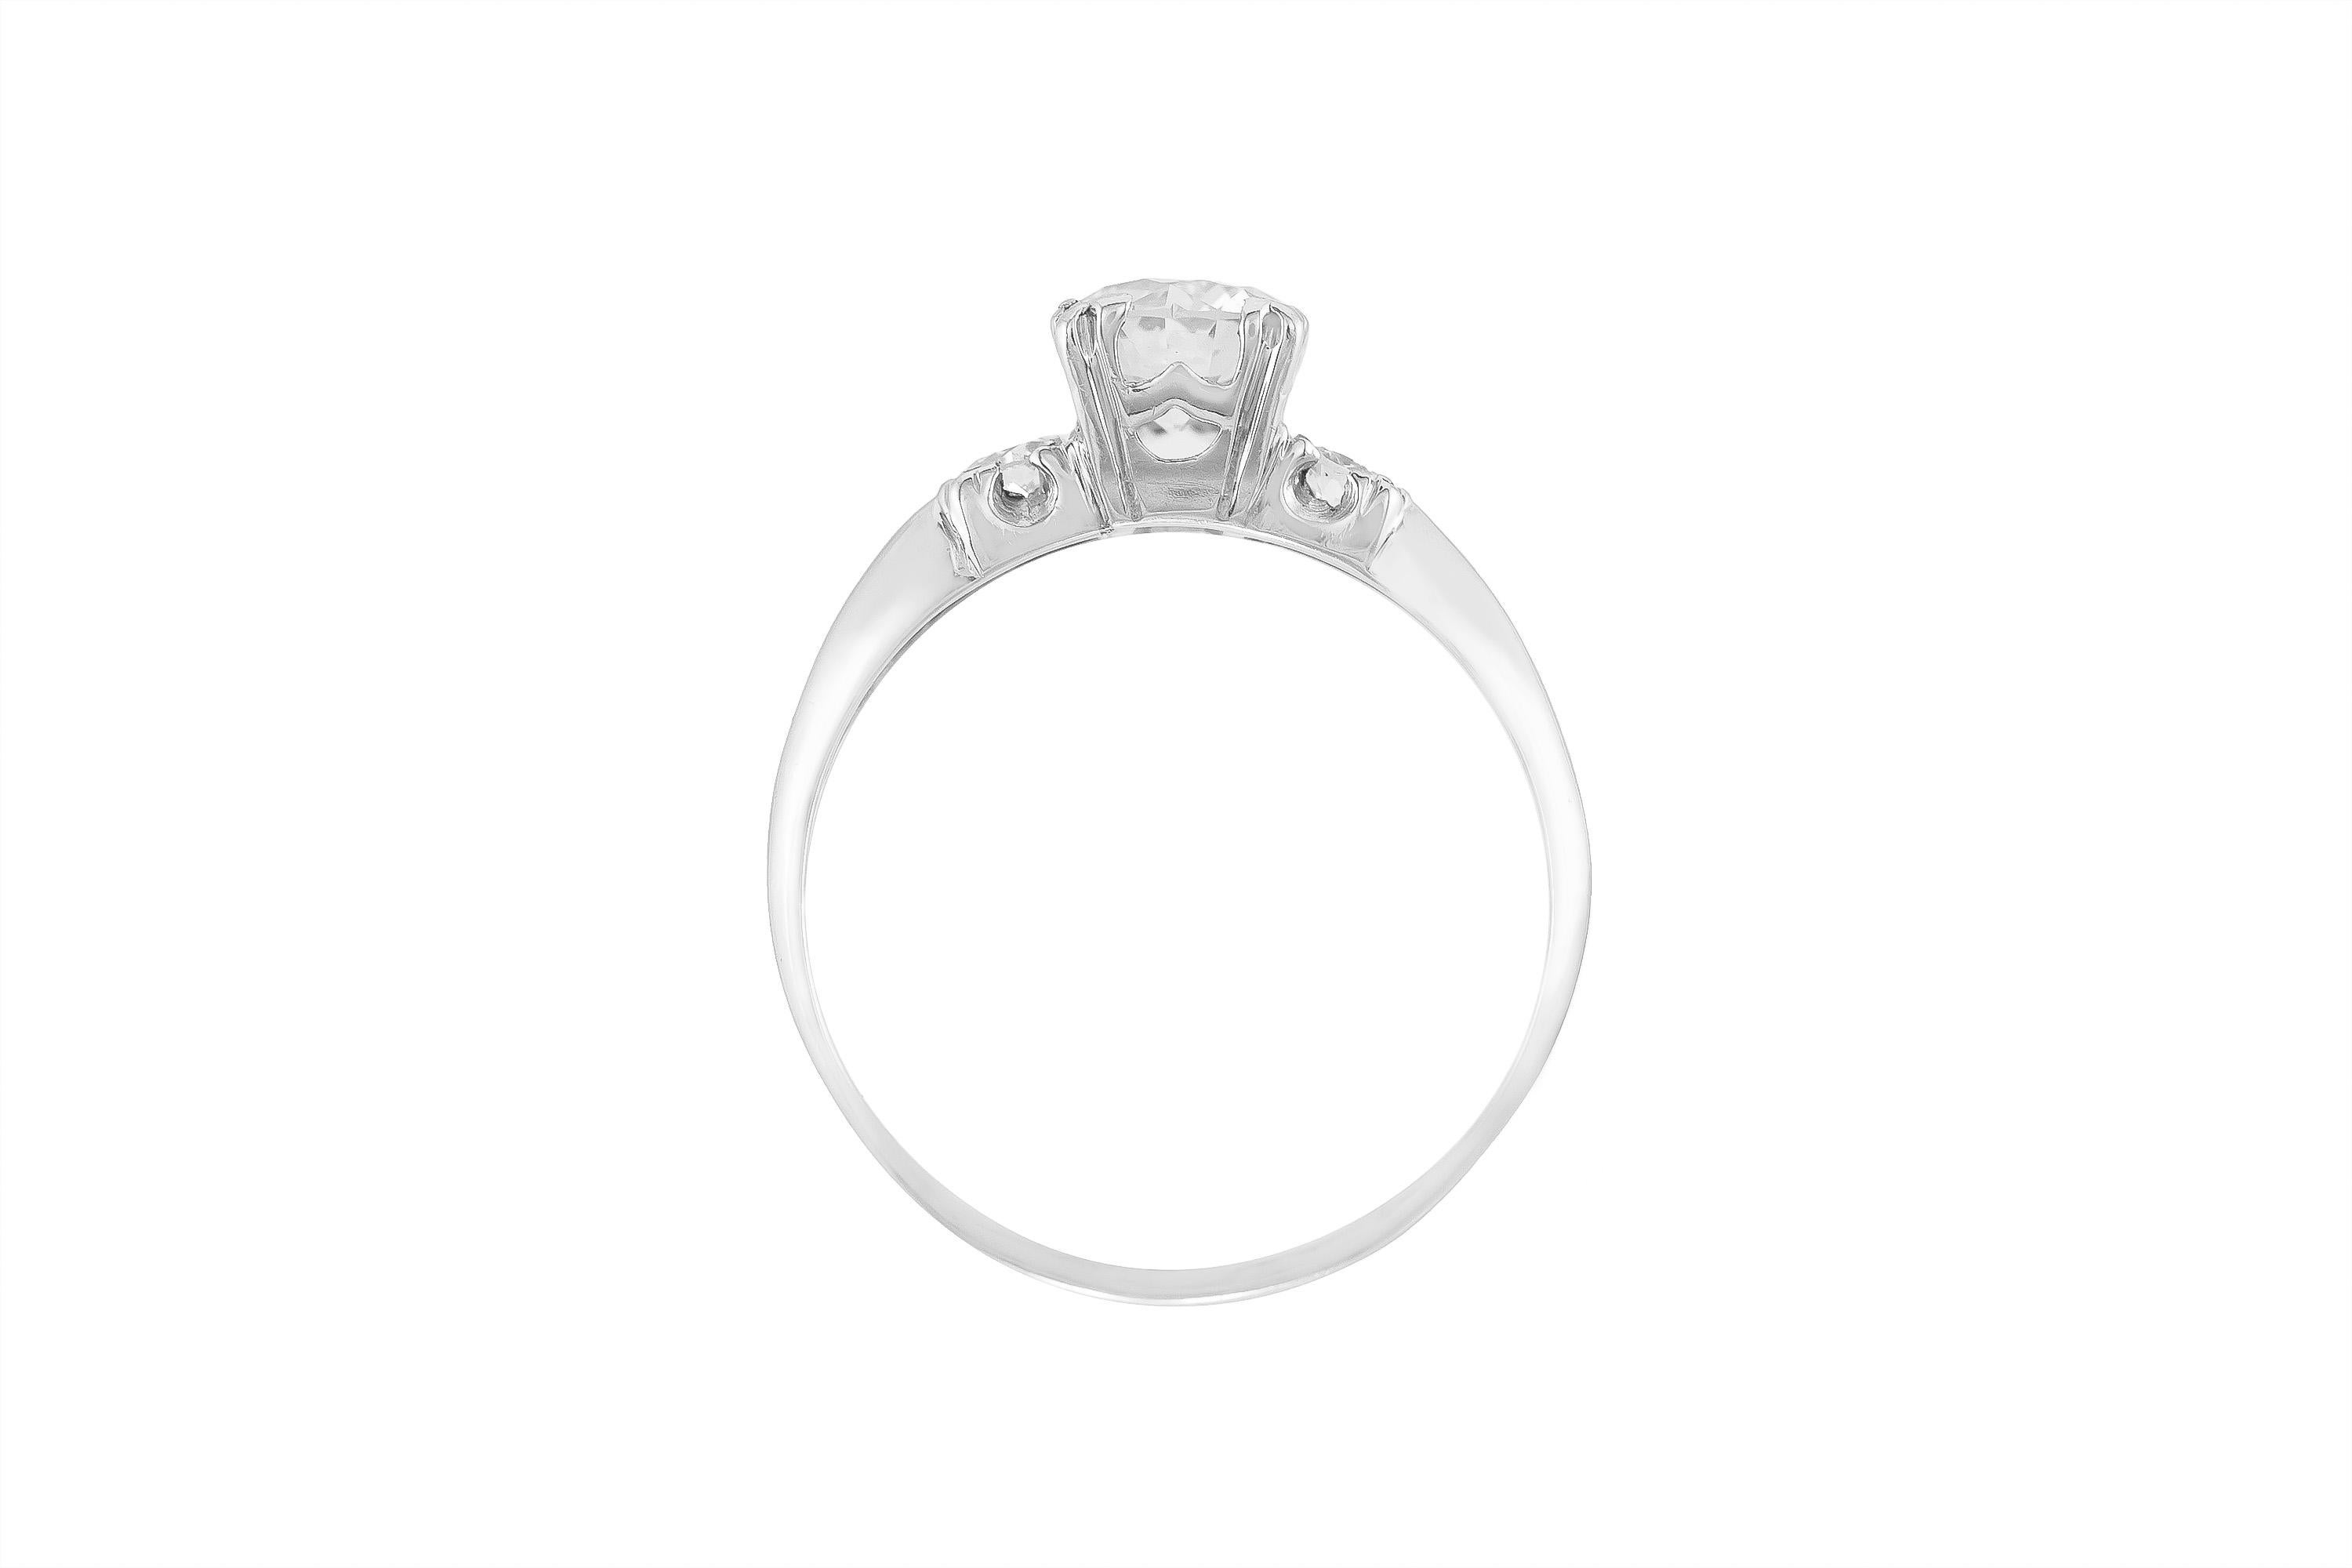 Finely crafted in platinum with a center stone weighing approximately 0.85 carat and two side diamonds weighing approximately 0.20 carat total. Color I Clarity SI1. 